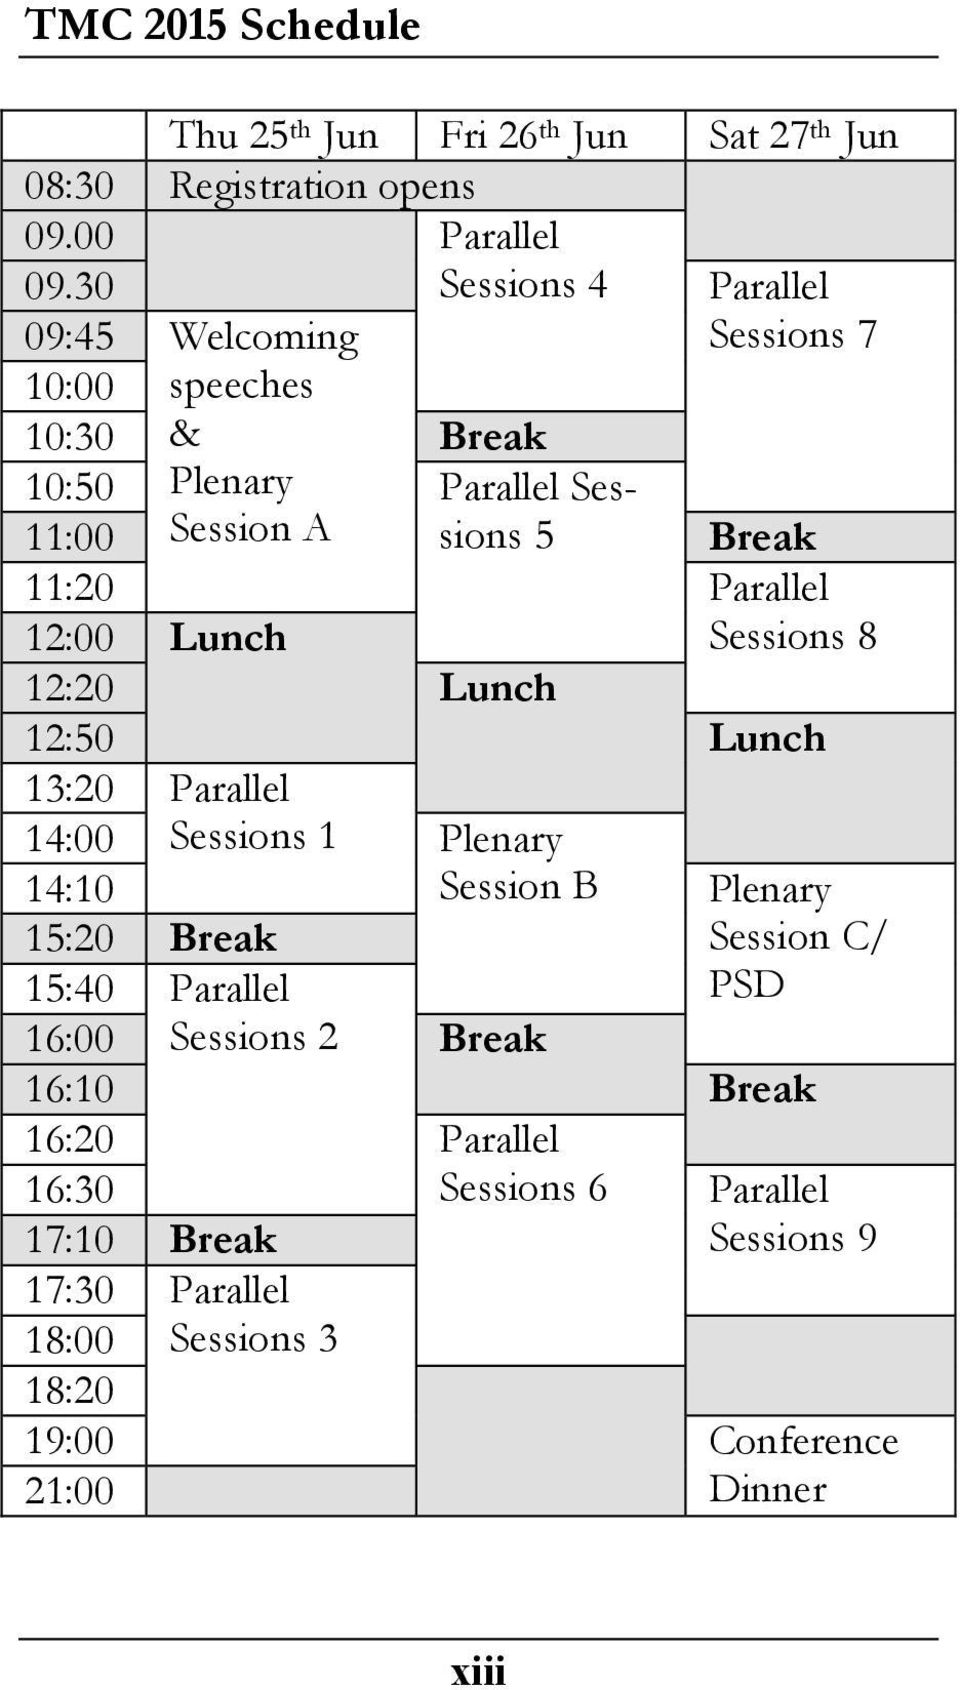 Parallel 12:00 Lunch Sessions 8 12:20 Lunch 12:50 Lunch 13:20 Parallel 14:00 Sessions 1 Plenary 14:10 Session B Plenary 15:20 Break Session C/